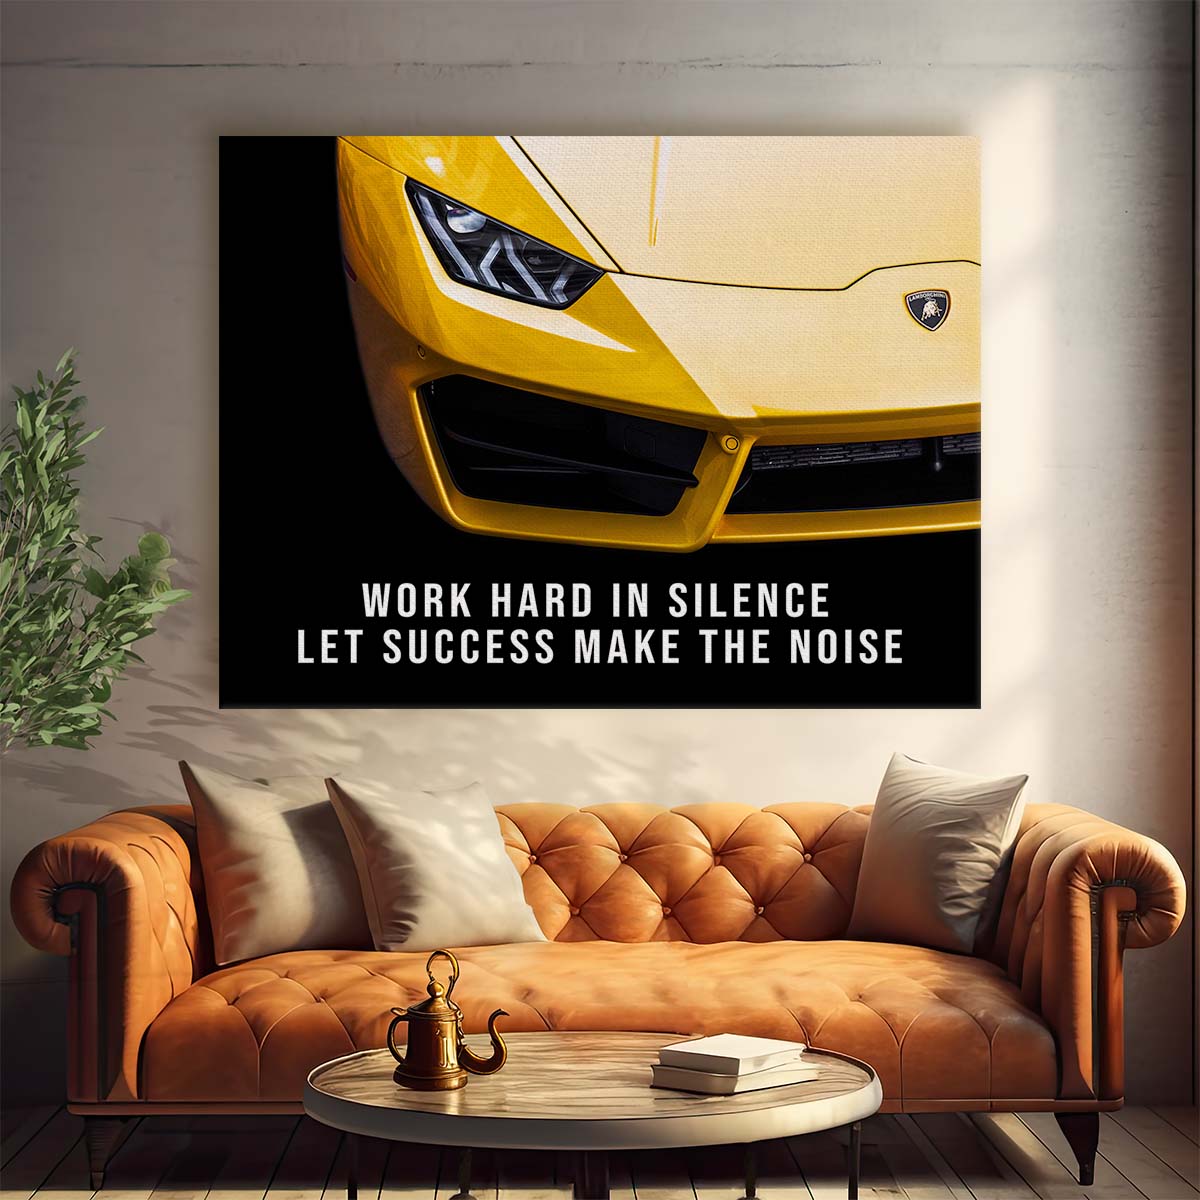 Work Hard In Silence Wall Art by Luxuriance Designs. Made in USA.